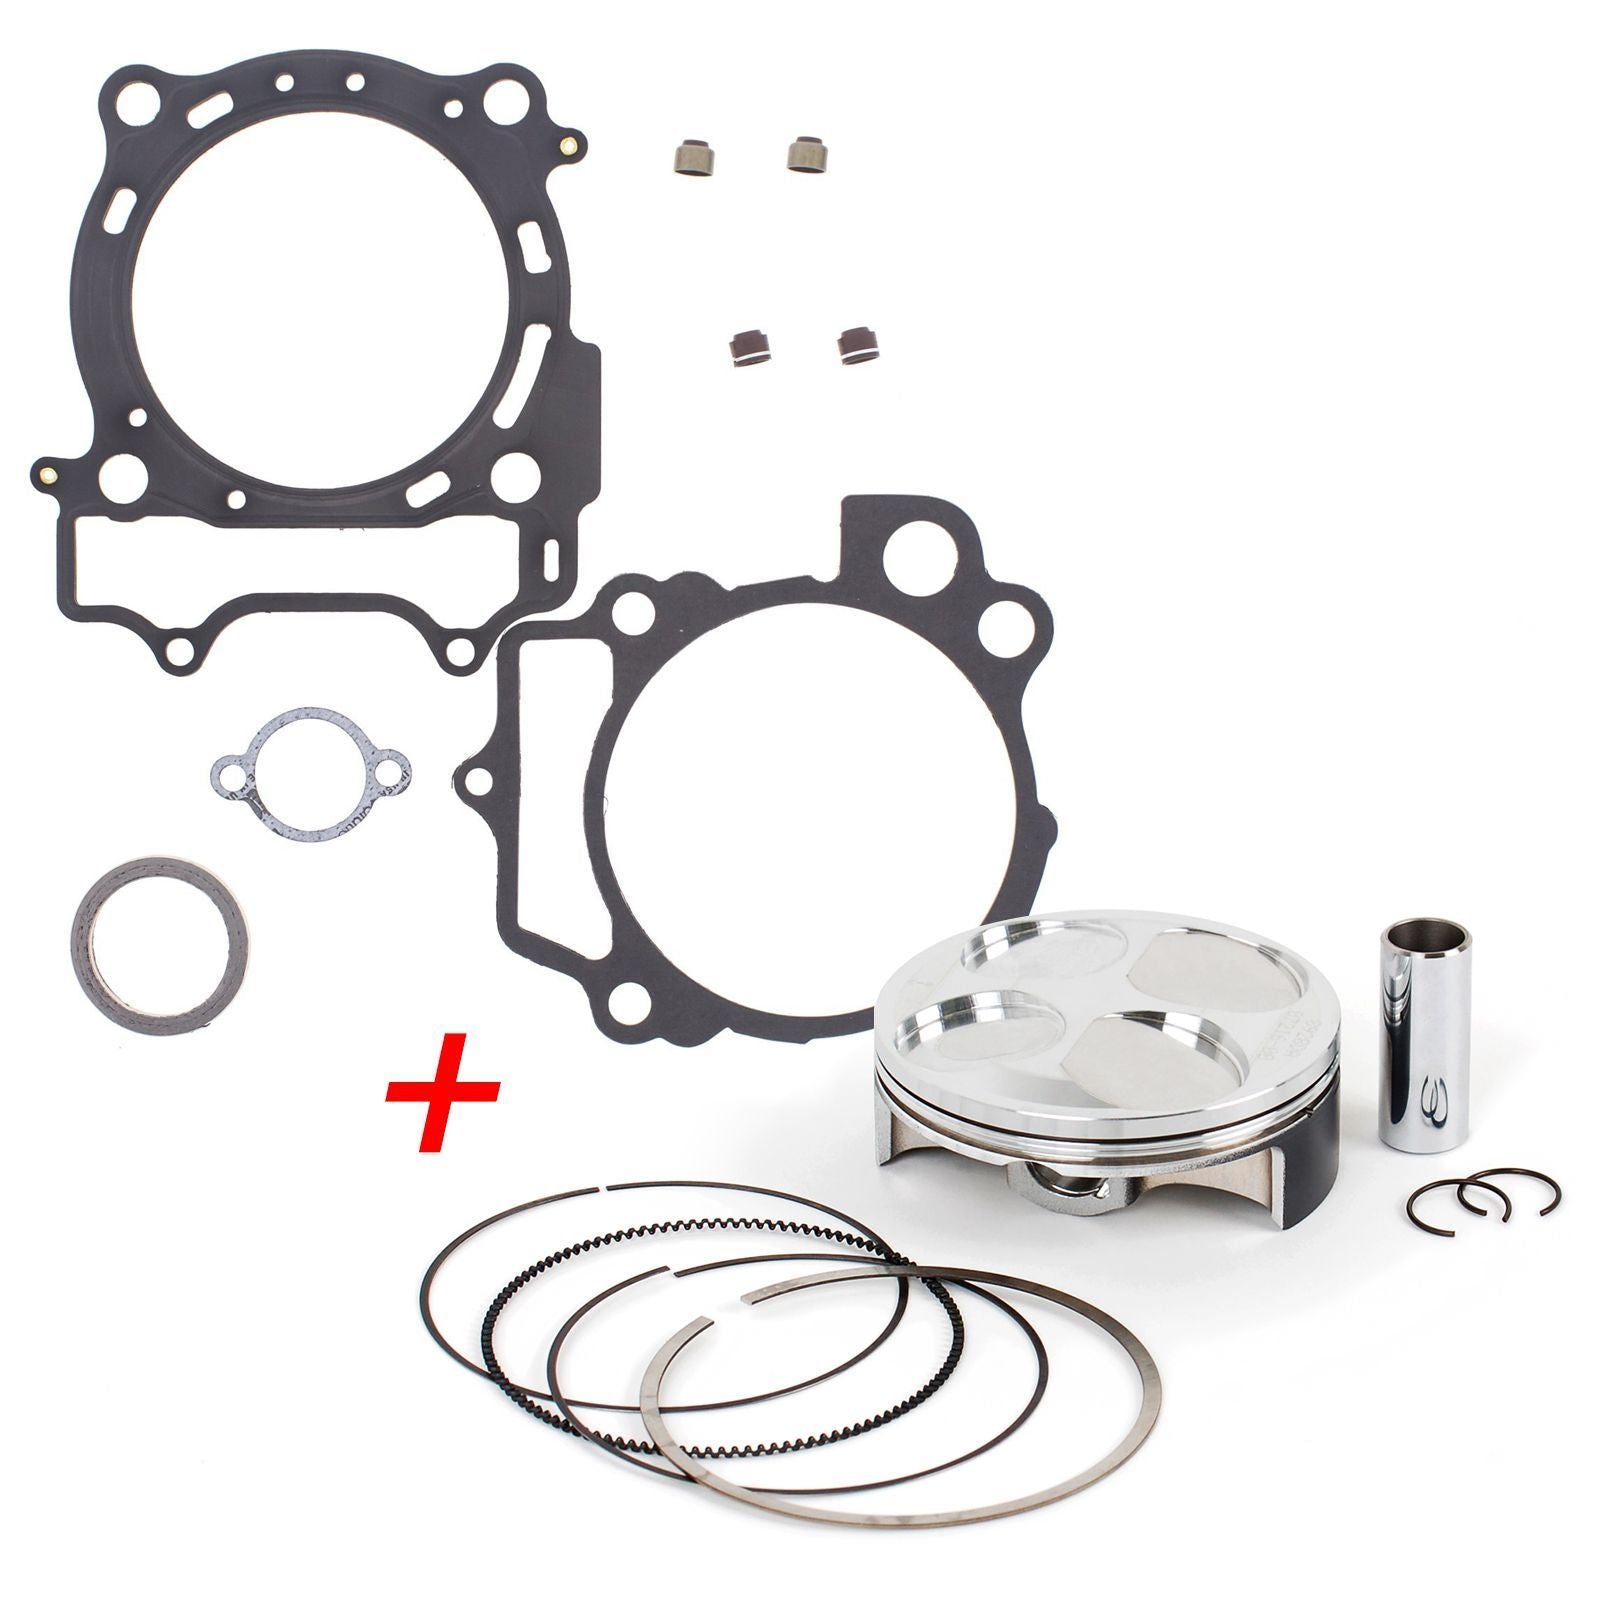 New Top End Rebuild Kit (A) For Yamaha WR250F 2001-2013 #ERTY030A